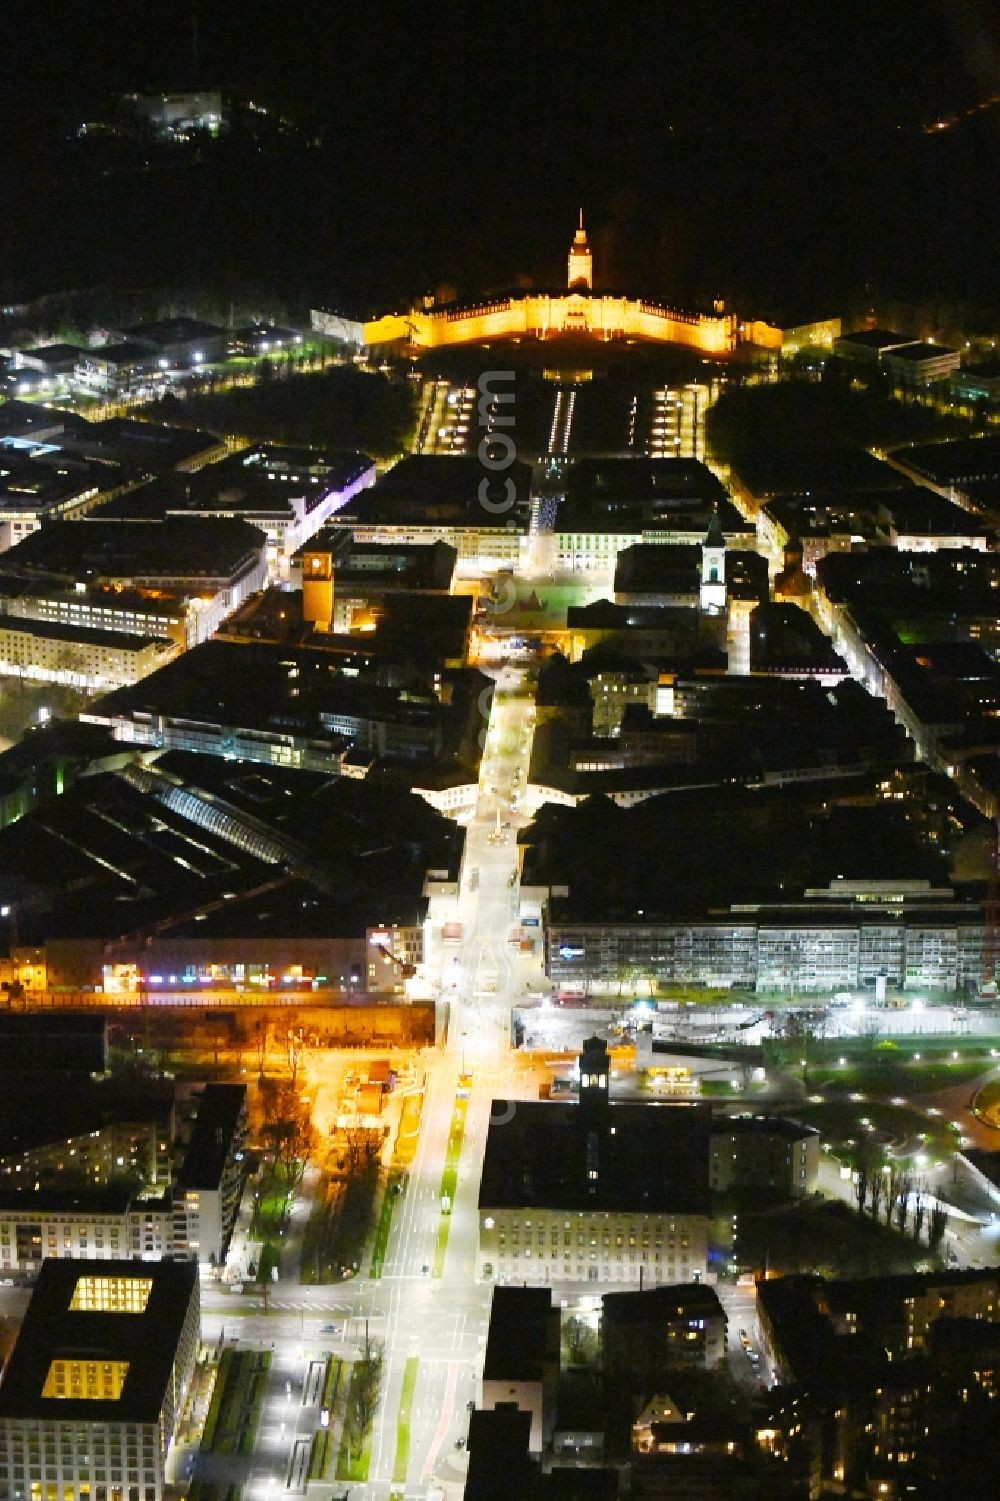 Aerial photograph at night Karlsruhe - Night lights and lighting in a city view of the inner city area with castle garden and castle on Karl-Friedrich-Strasse in Karlsruhe in the state Baden-Wurttemberg, Germany